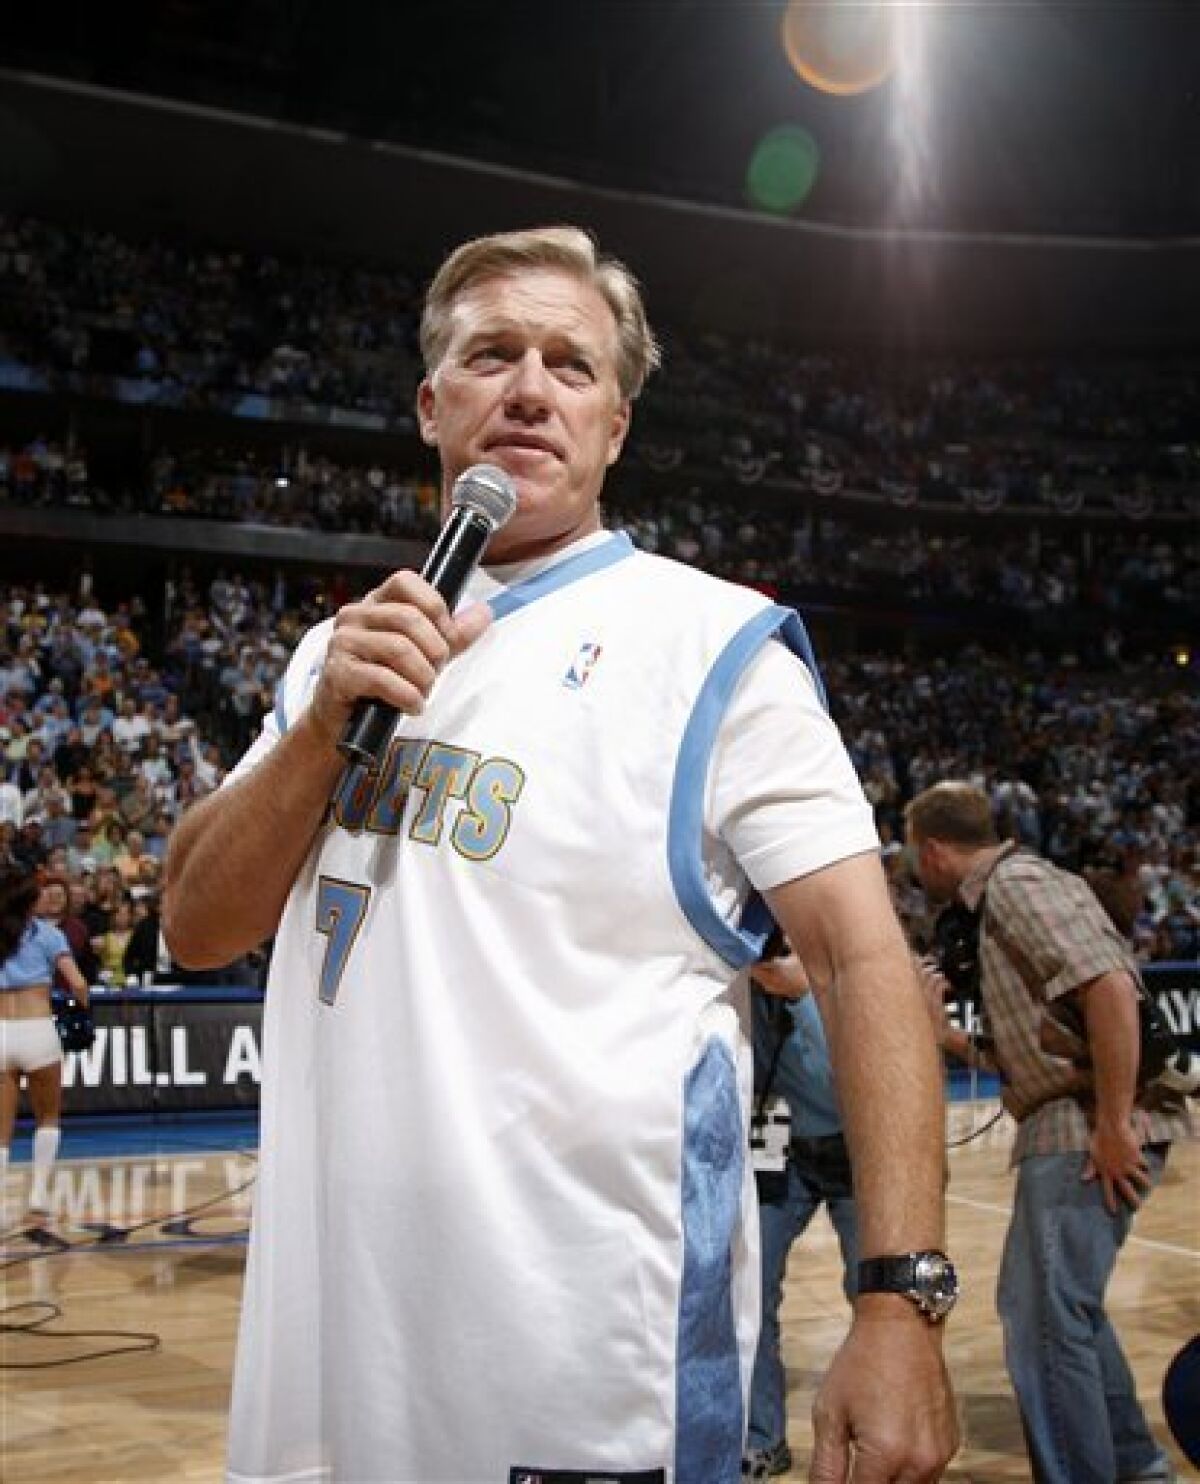 Retired Denver Broncos quarterback John Elway introduces the Denver Nuggets before the Nuggets played the Dallas Mavericks in the opening game of an NBA basketball Western Conference semifinal series in Denver on Sunday, May 3, 2009. (AP Photo/Jack Dempsey)